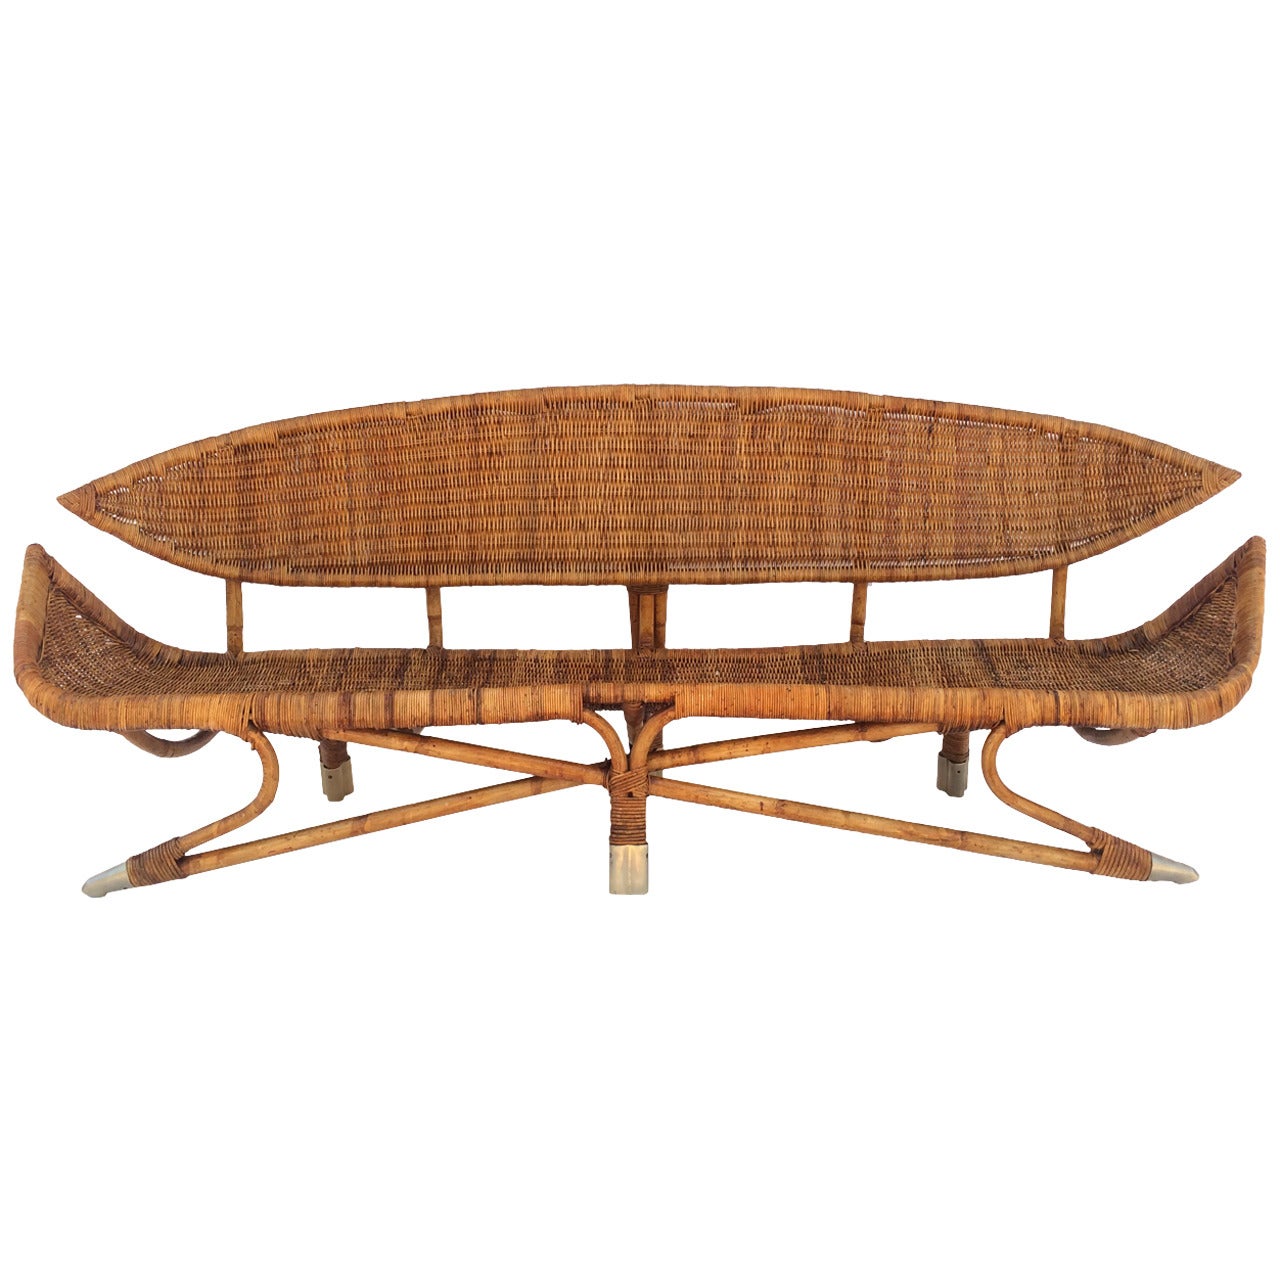 Rare Sculptural Rattan and Brass Sofa in the Manner of Francis Mair